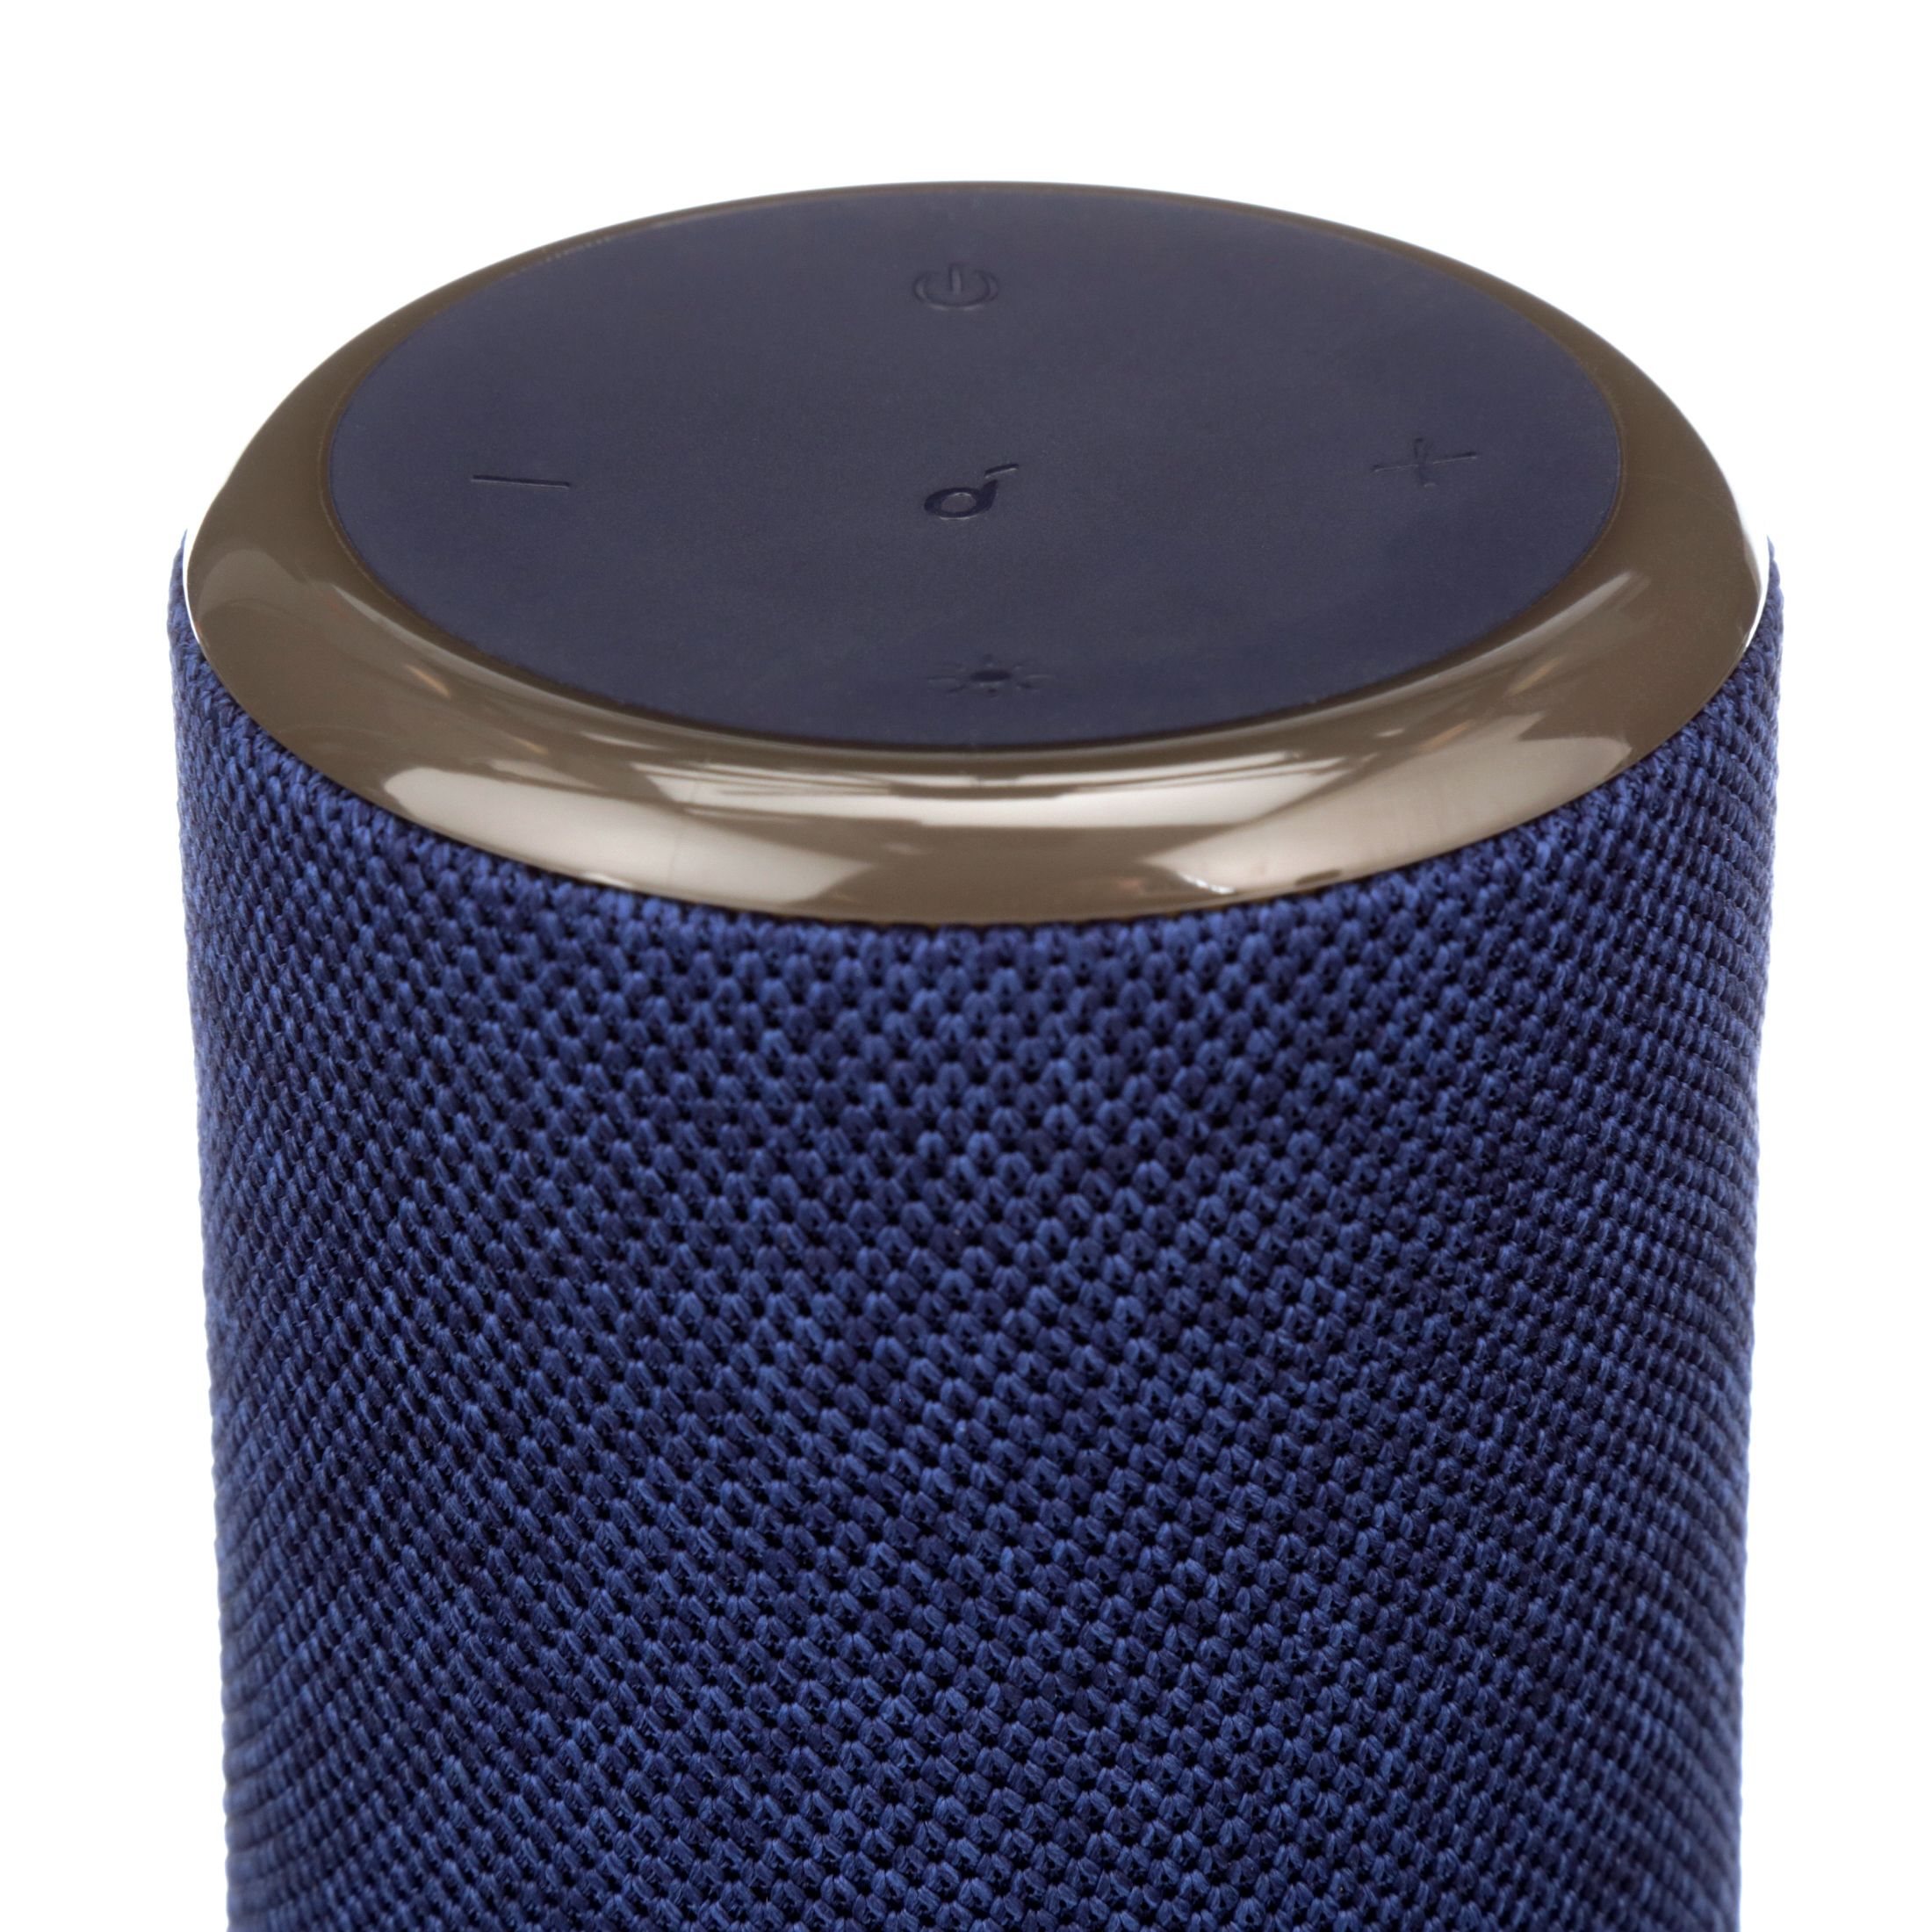 Soundcore by Anker- Flare 2 Portable Speaker | IPX7 Waterproof | 360 Sound | 12-Hour Playtime | Blue | A3165Z31 - image 2 of 10